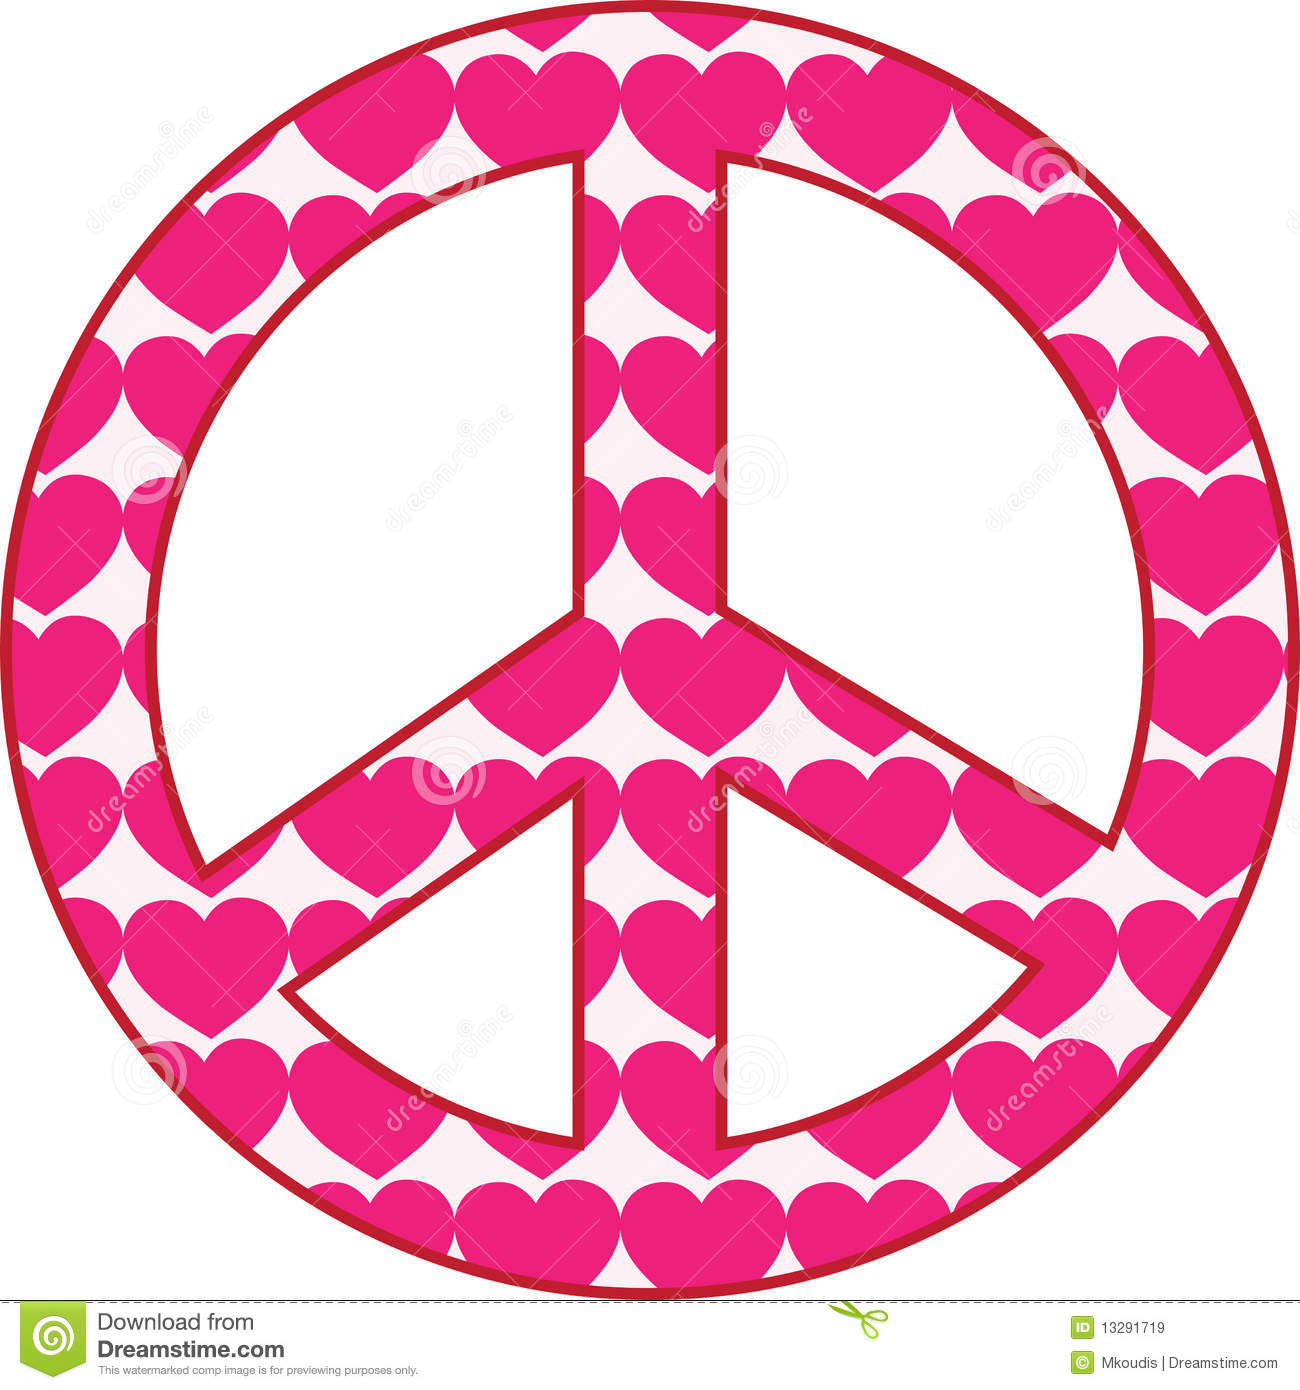 Heart Peace Sign Royalty Free Stock Images   Image  13291719